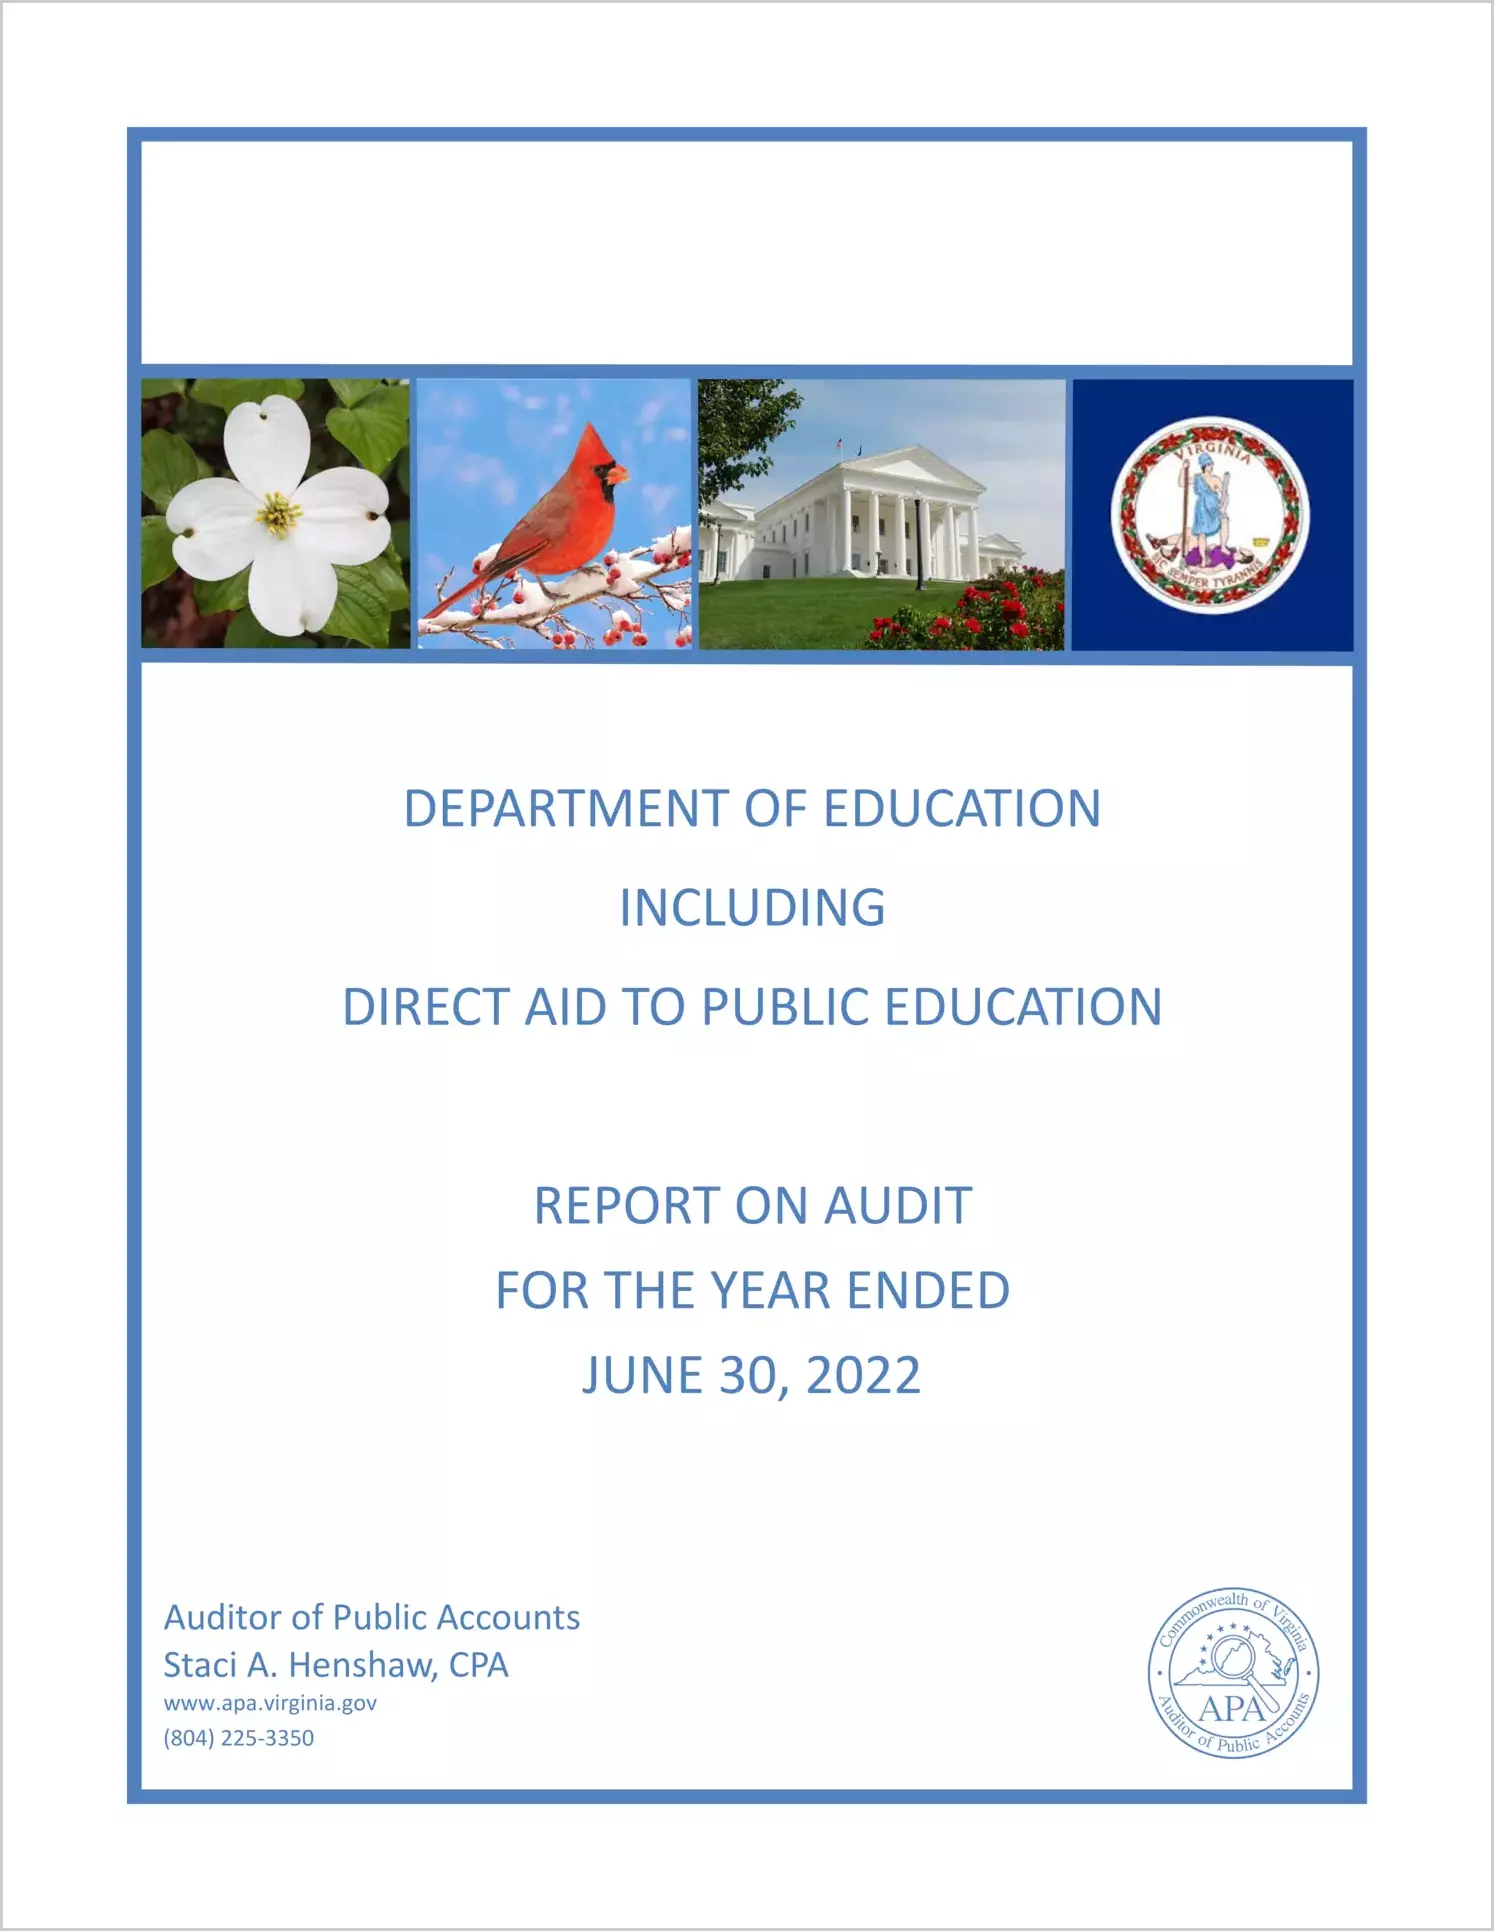 Department of Education including Direct Aid to Public Education for the year ended June 30, 2022